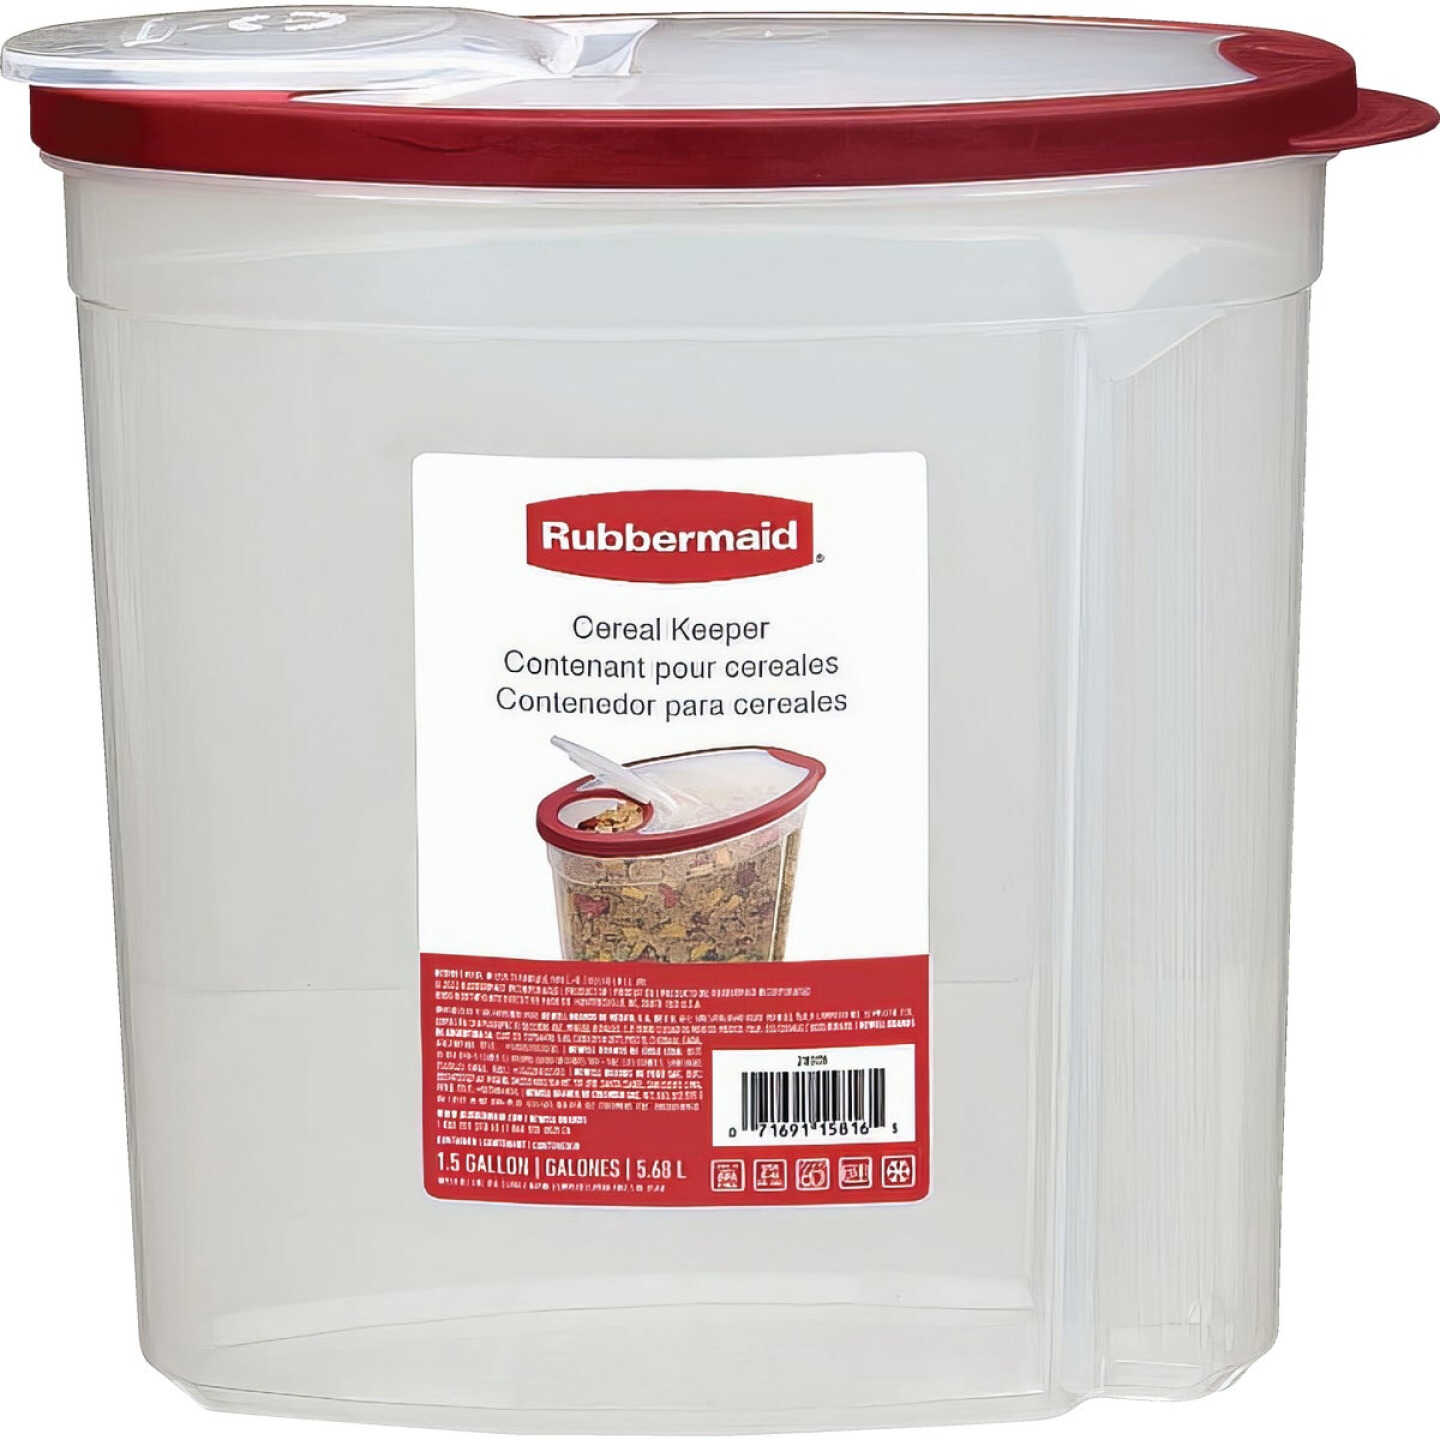 You'll always have the freshest cereal with these Rubbermaid